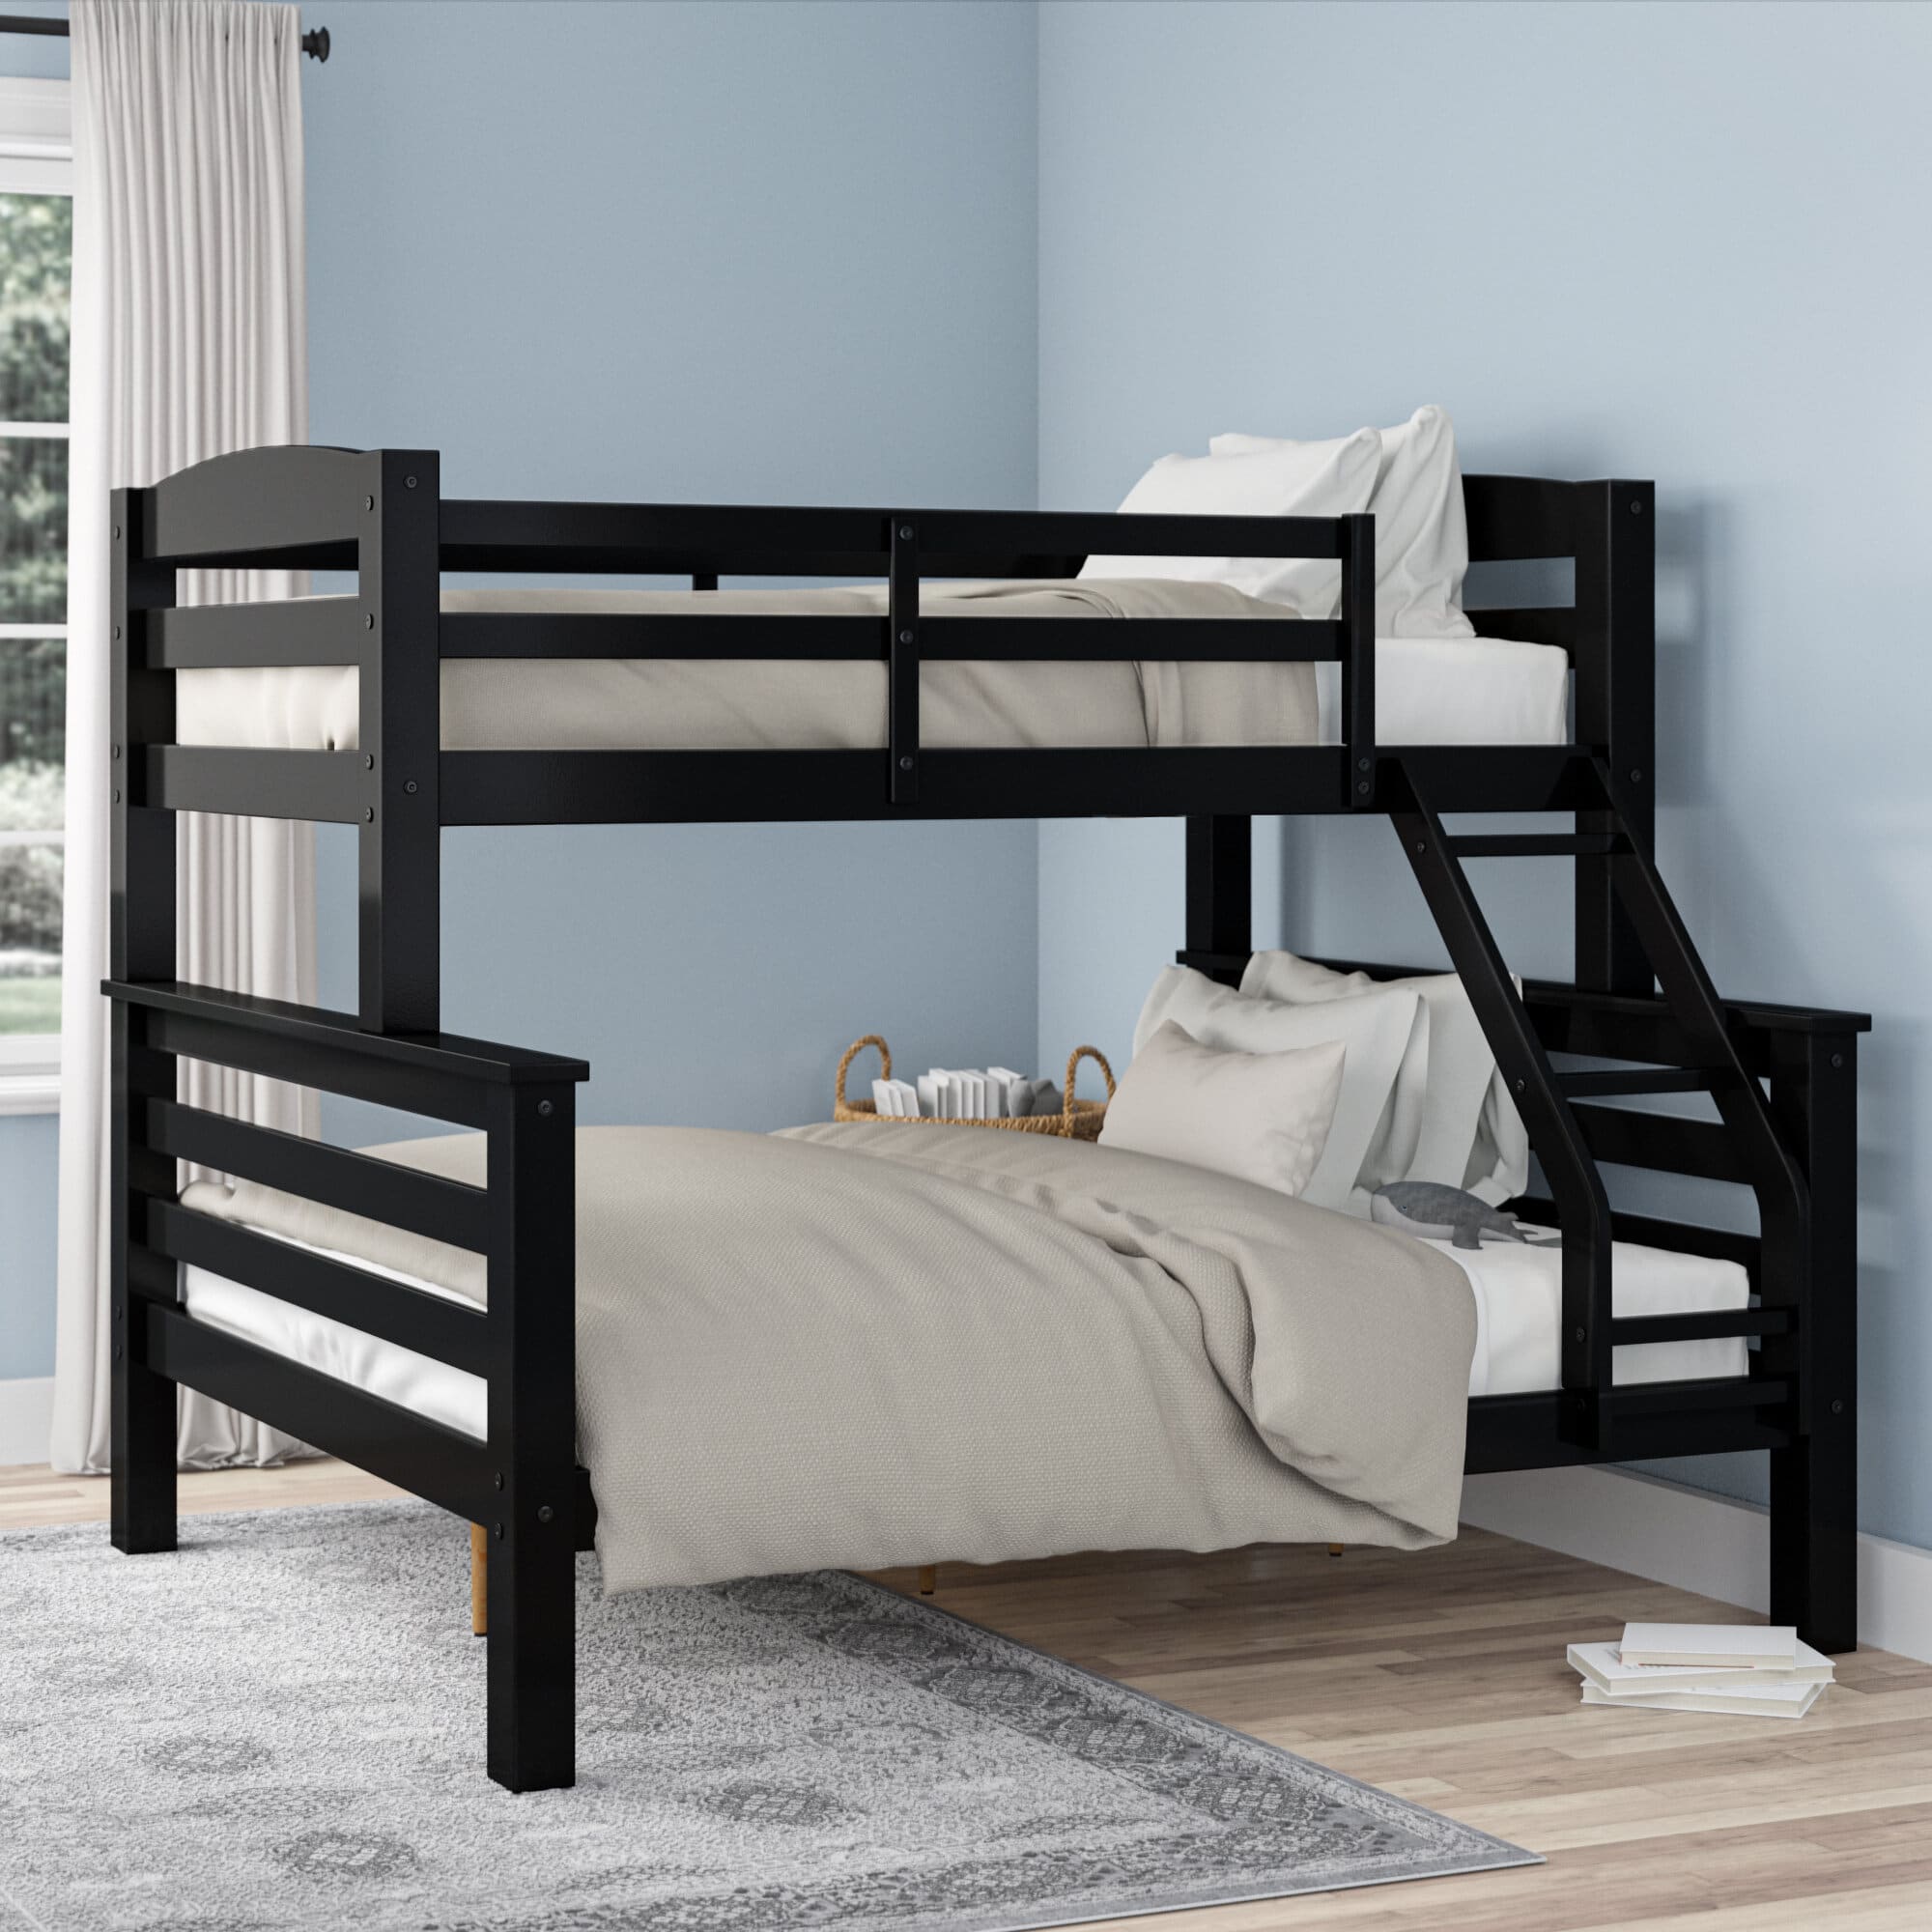 6 Best Twin Over Full Bunk Beds May, Full Top Bunk Bed